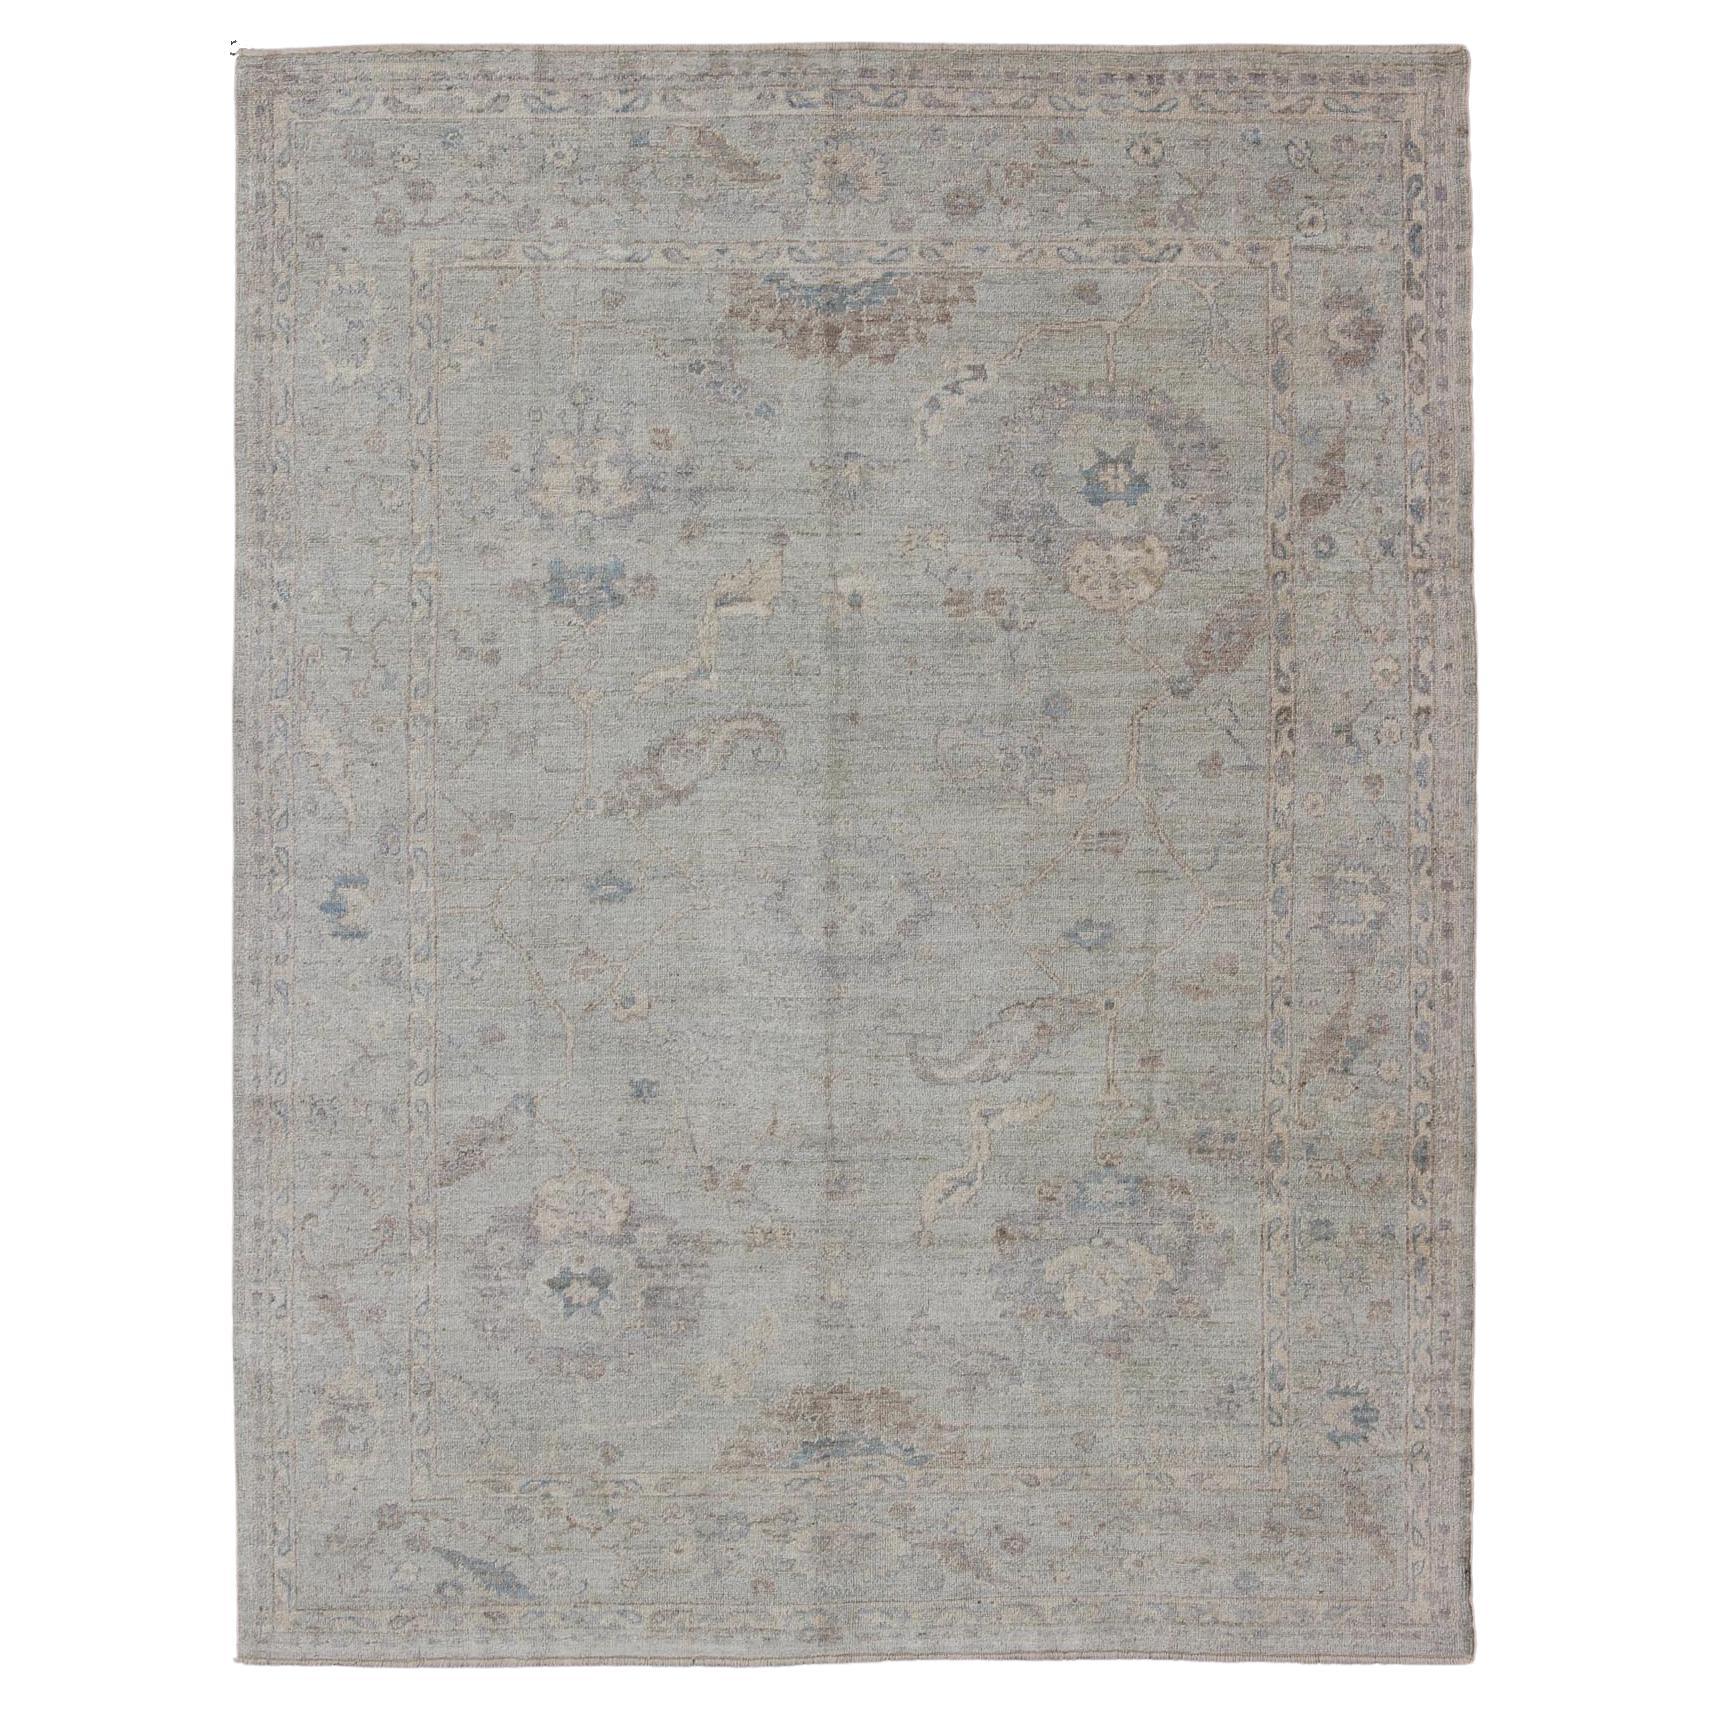 Keivan Woven Arts Angora Oushak Turkish Rug in Shades of Light Blue and Cream For Sale